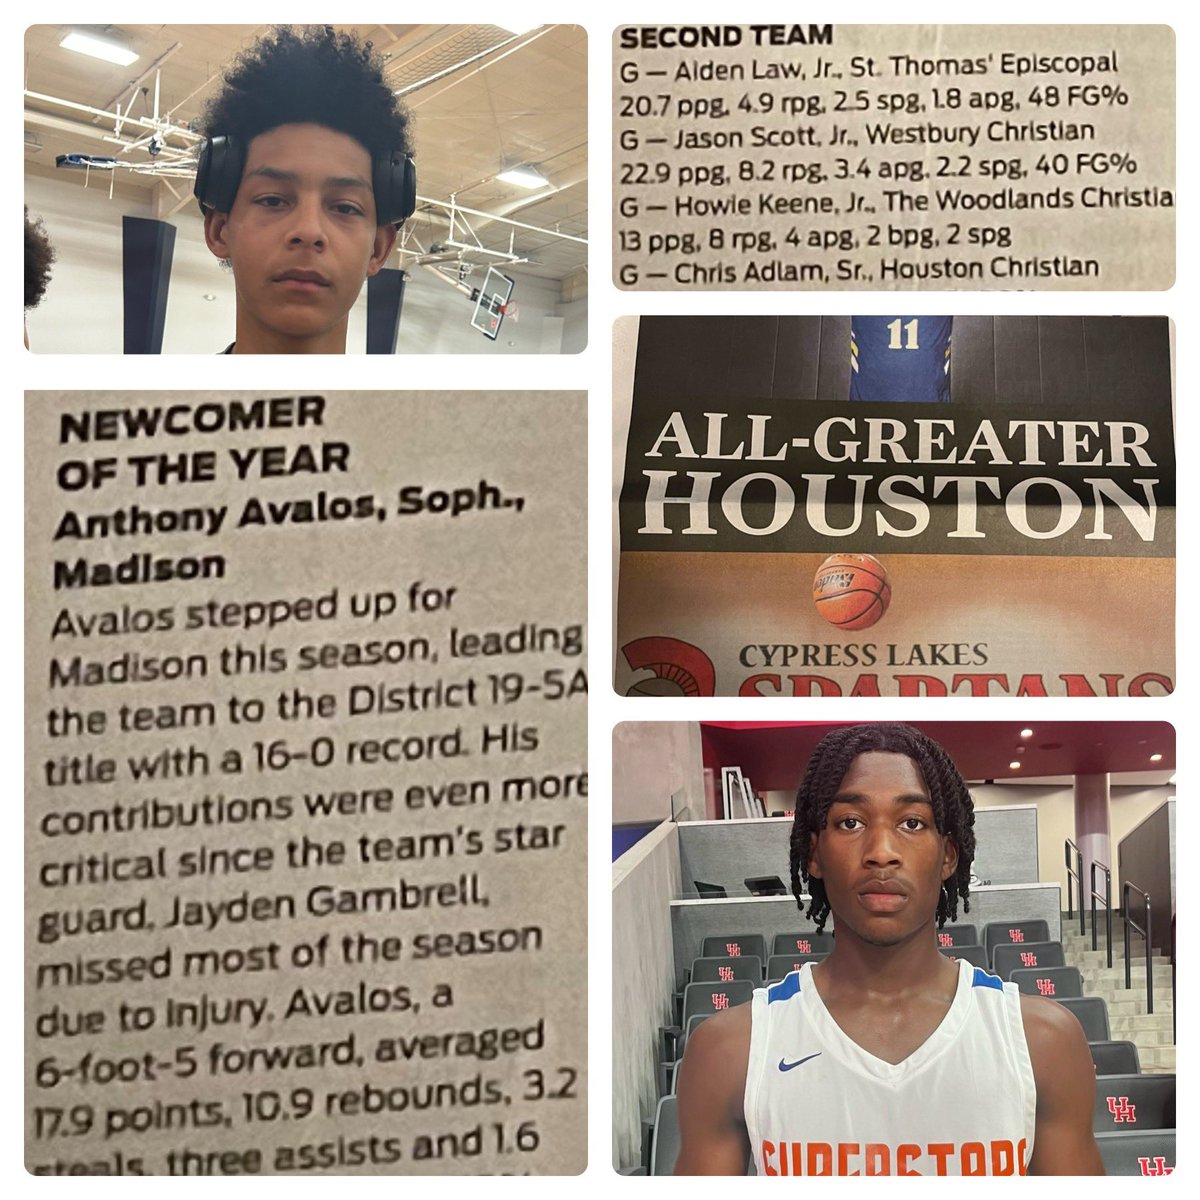 Congratulations to Superstars @ihoopchris_ for making All~Greater Houston 2nd team and @AnthonyAva79191 Newcomer of the Year! #keepshining✨ @jeurey1962 @young_murf @Marlinbball @HCStangsMBB @TexasHoopsGASO @RcsSports @bigsloan32 @SJBasketball14 @ihss_houston se